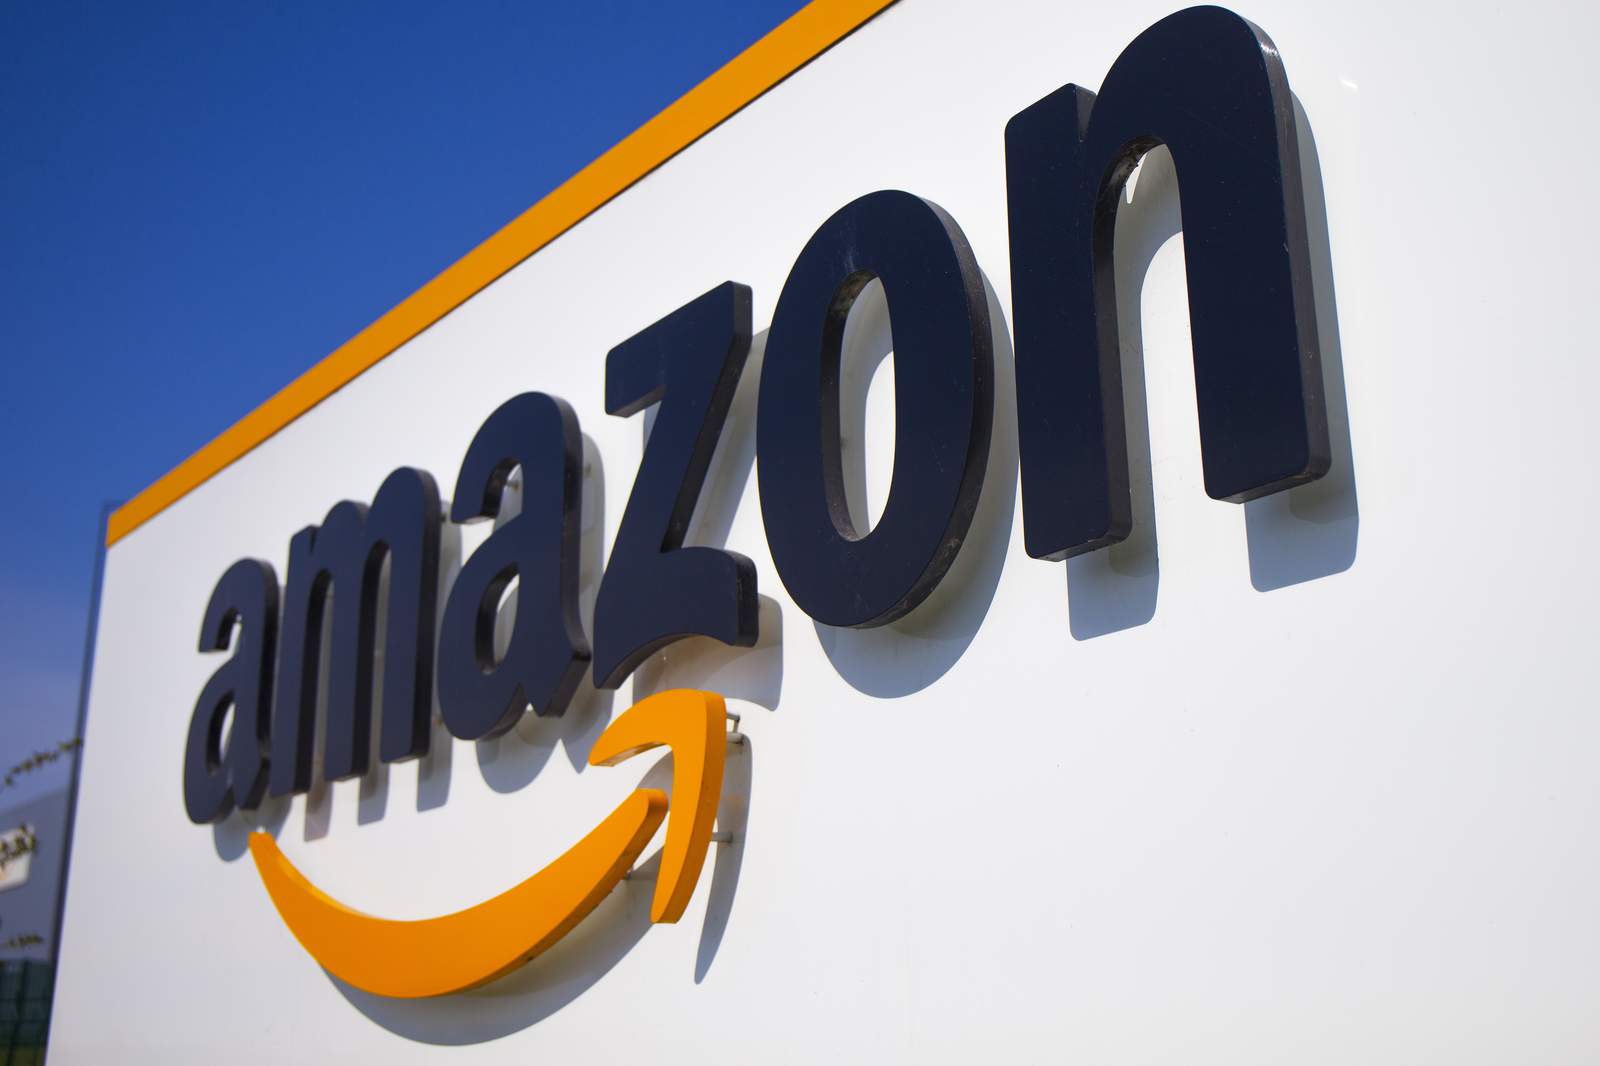 Report: St. Johns County’s approved Amazon facility could open next year